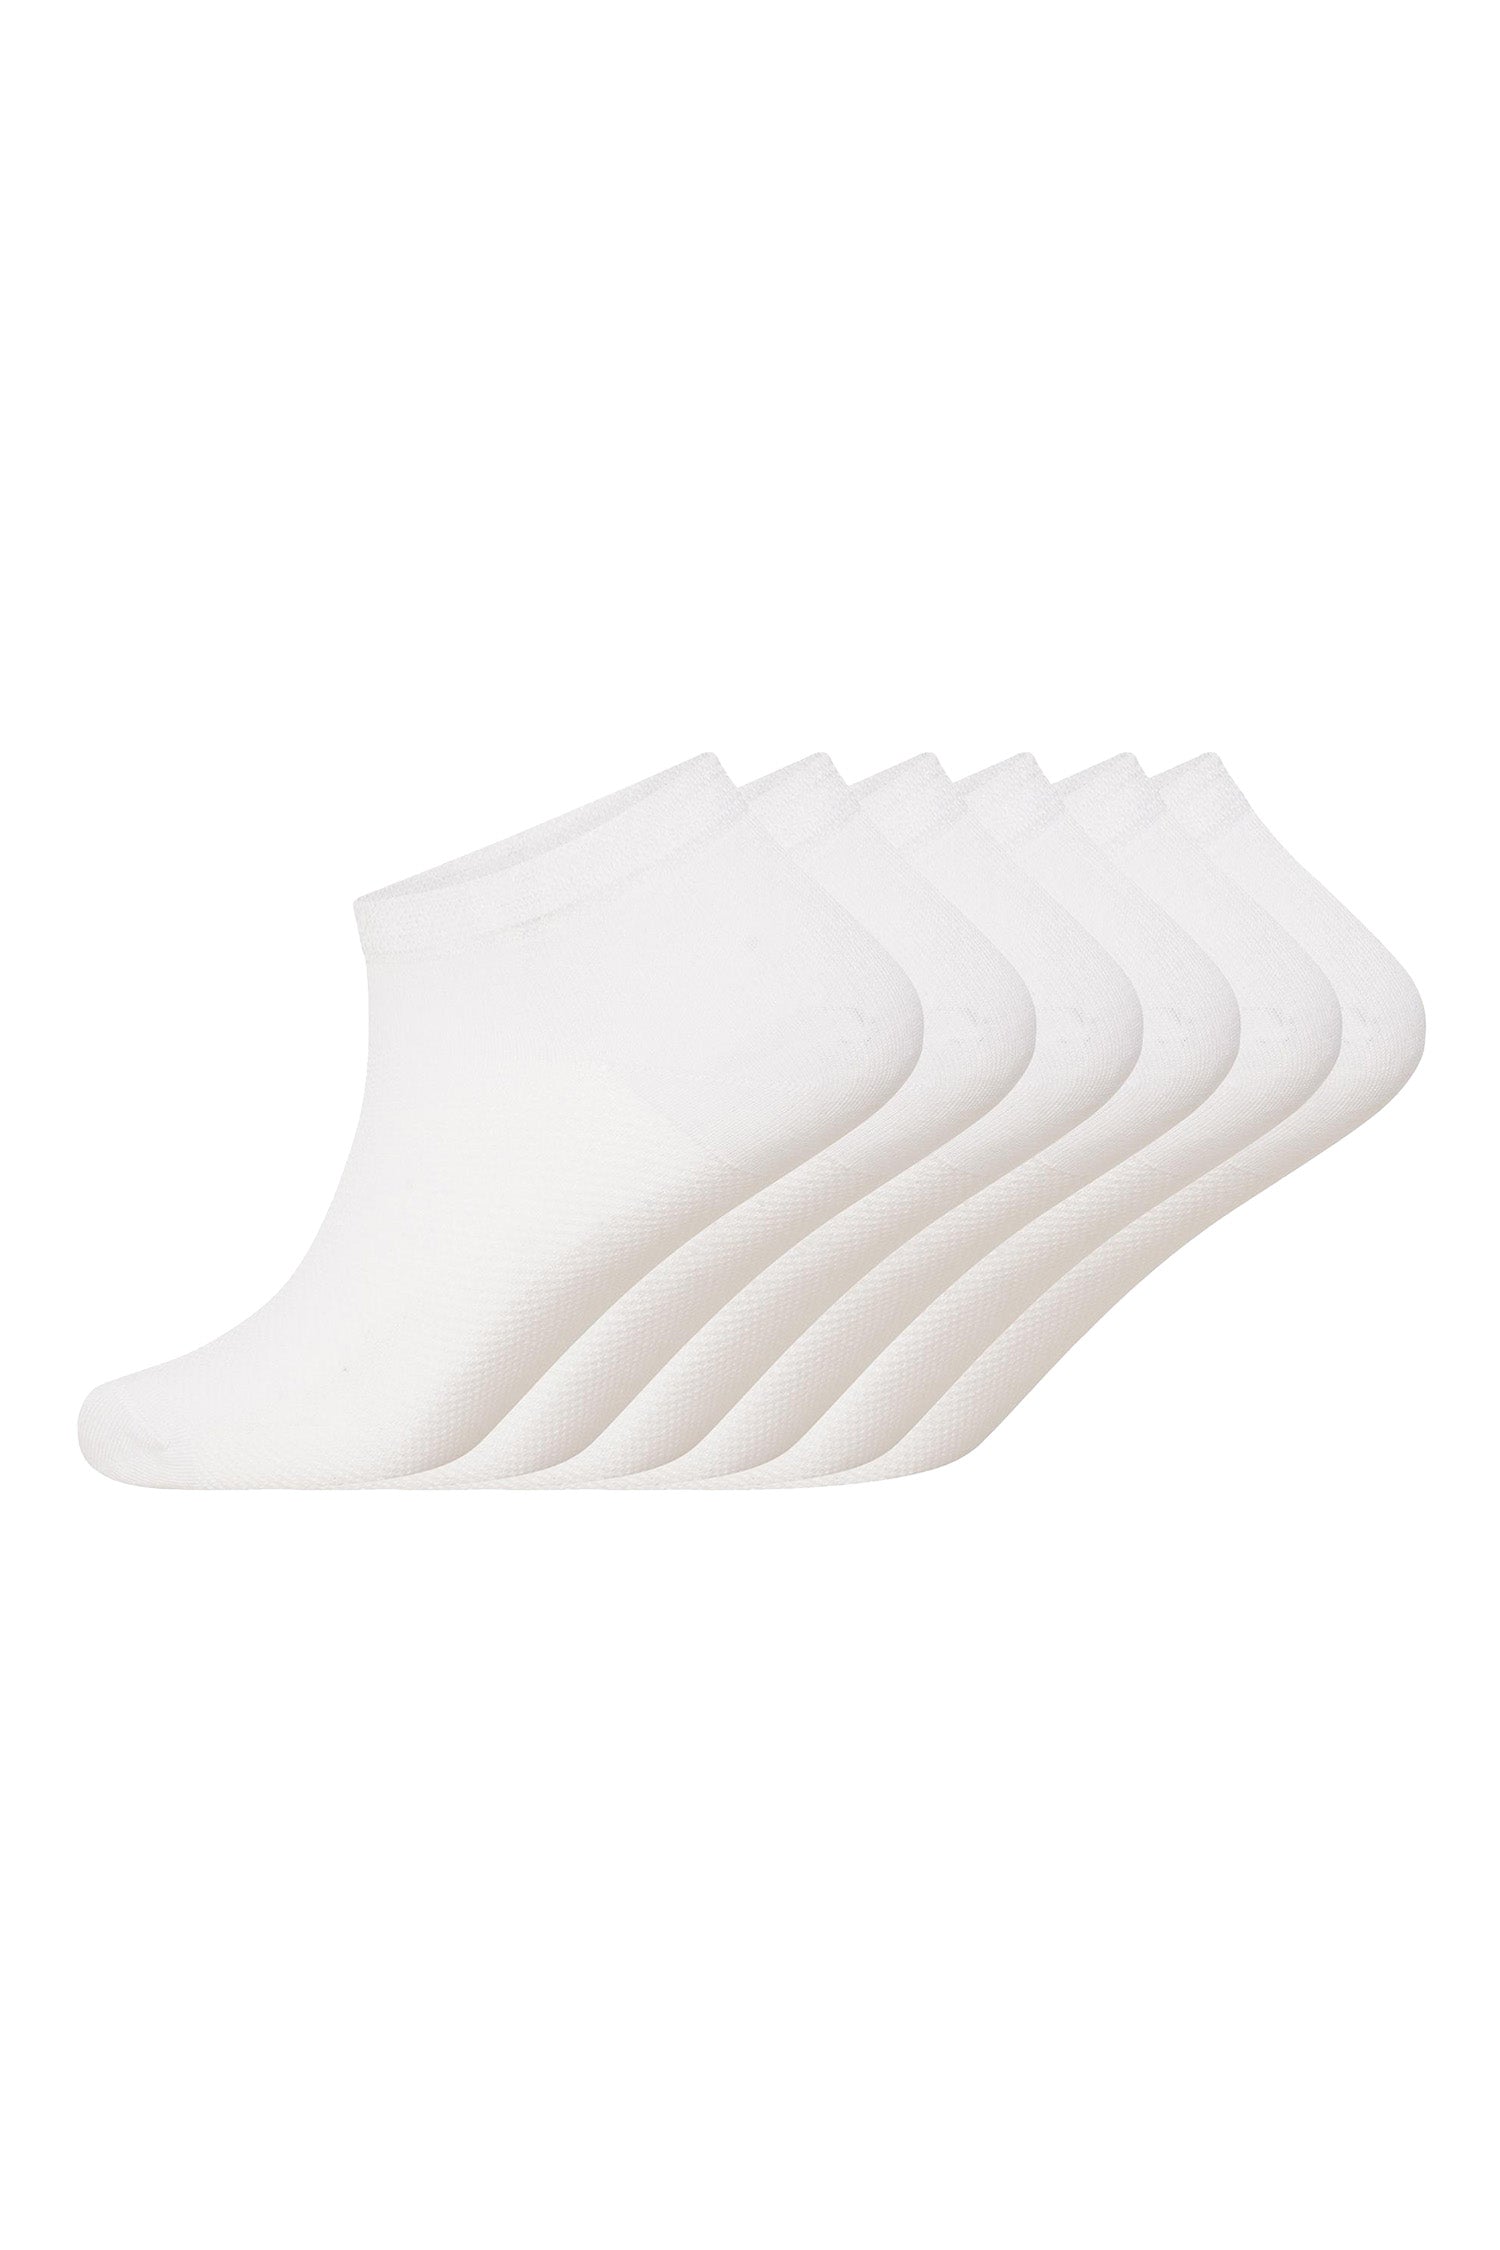 Ladies Bamboo Trainer Ankle Socks, Breathable Low Cut Ankle Trainer Sock - White (6 Pack)